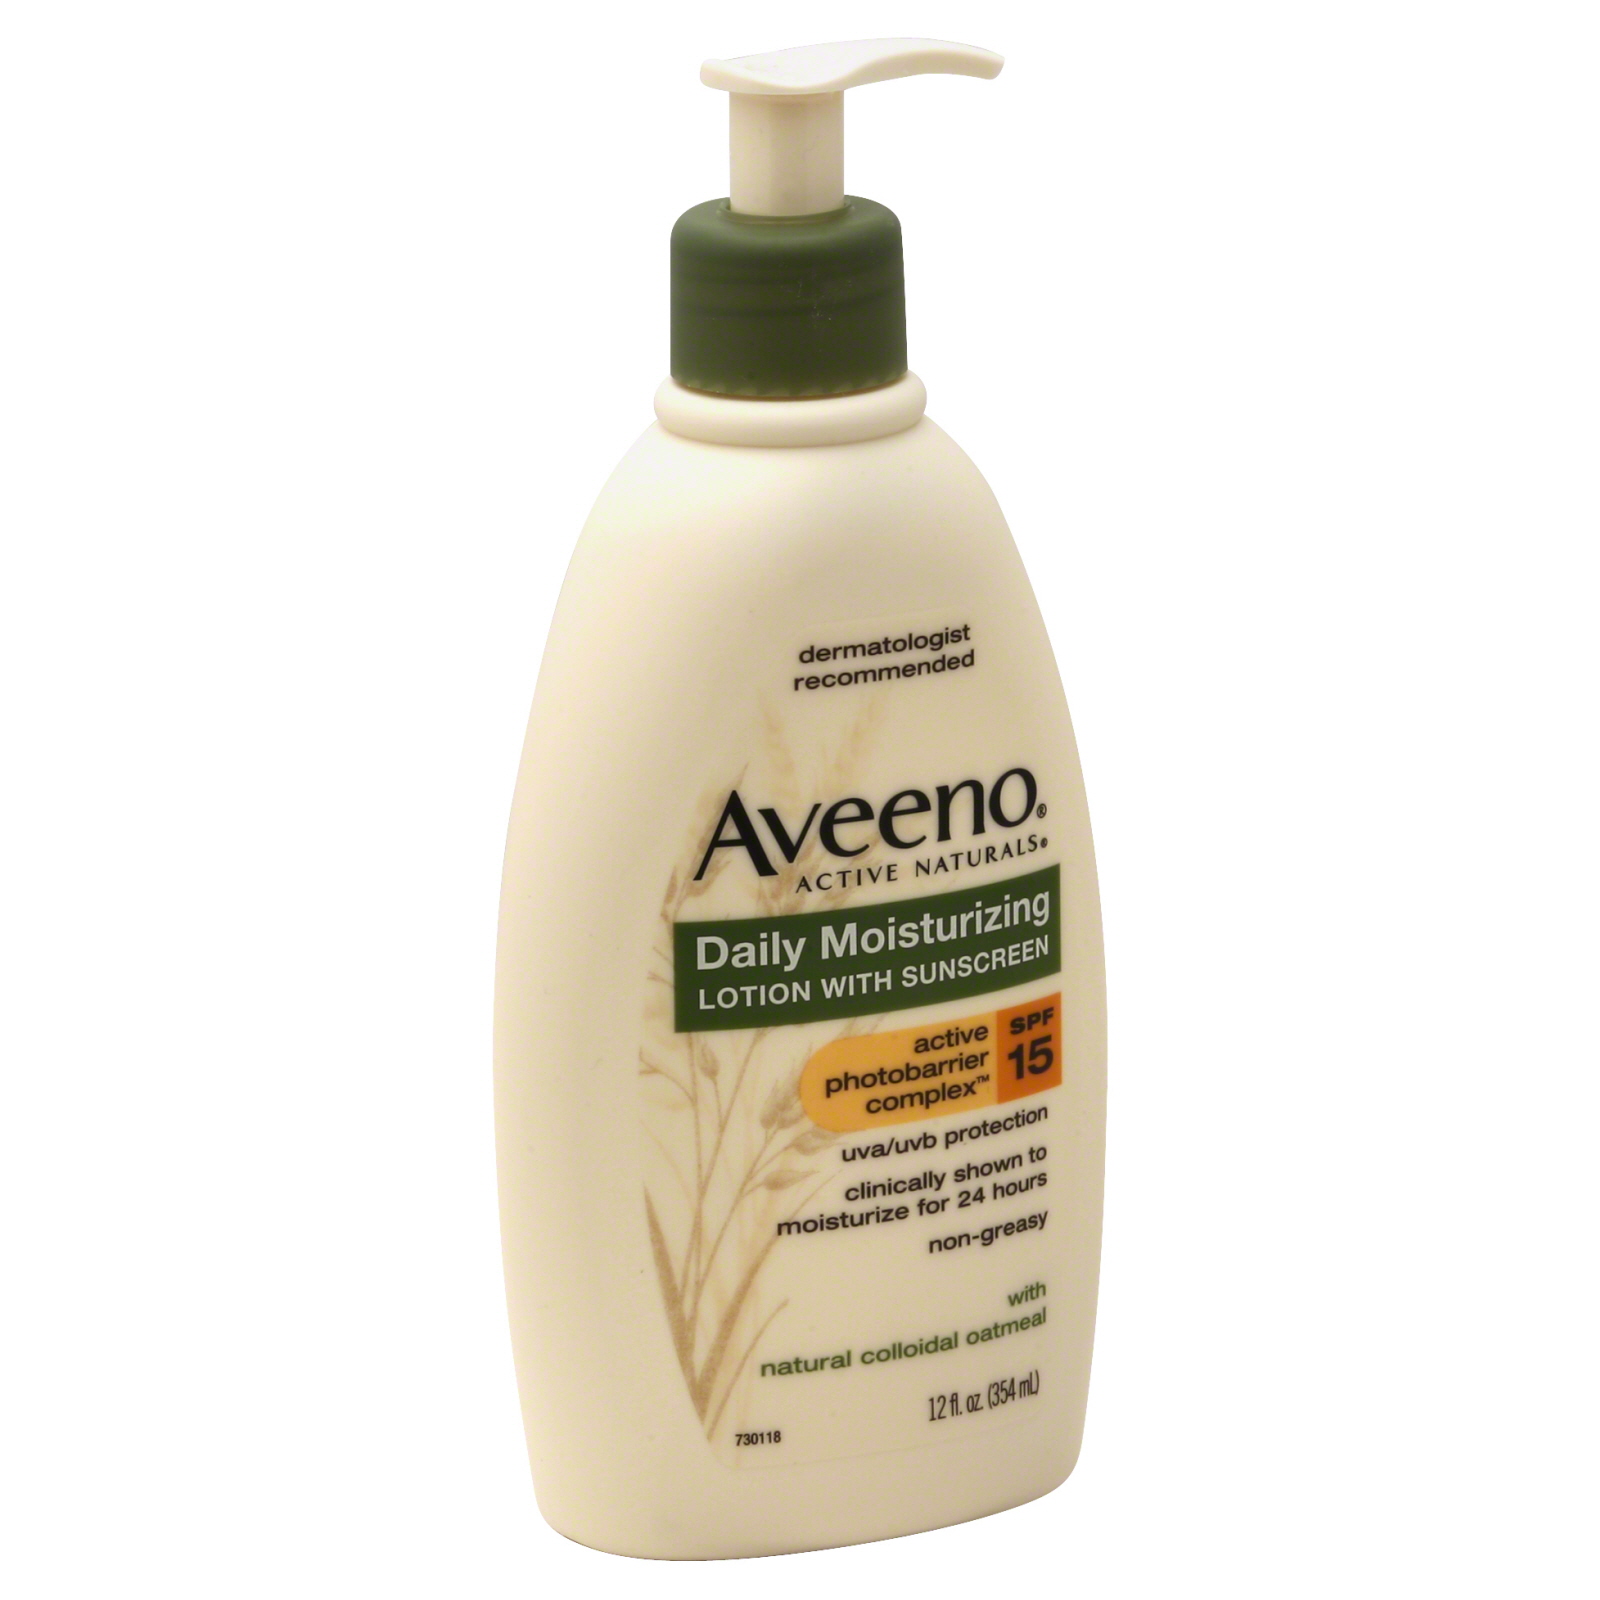 Aveeno Active Naturals Lotion, Daily Moisturizing, with Sunscreen, 12 fl oz (354 ml)